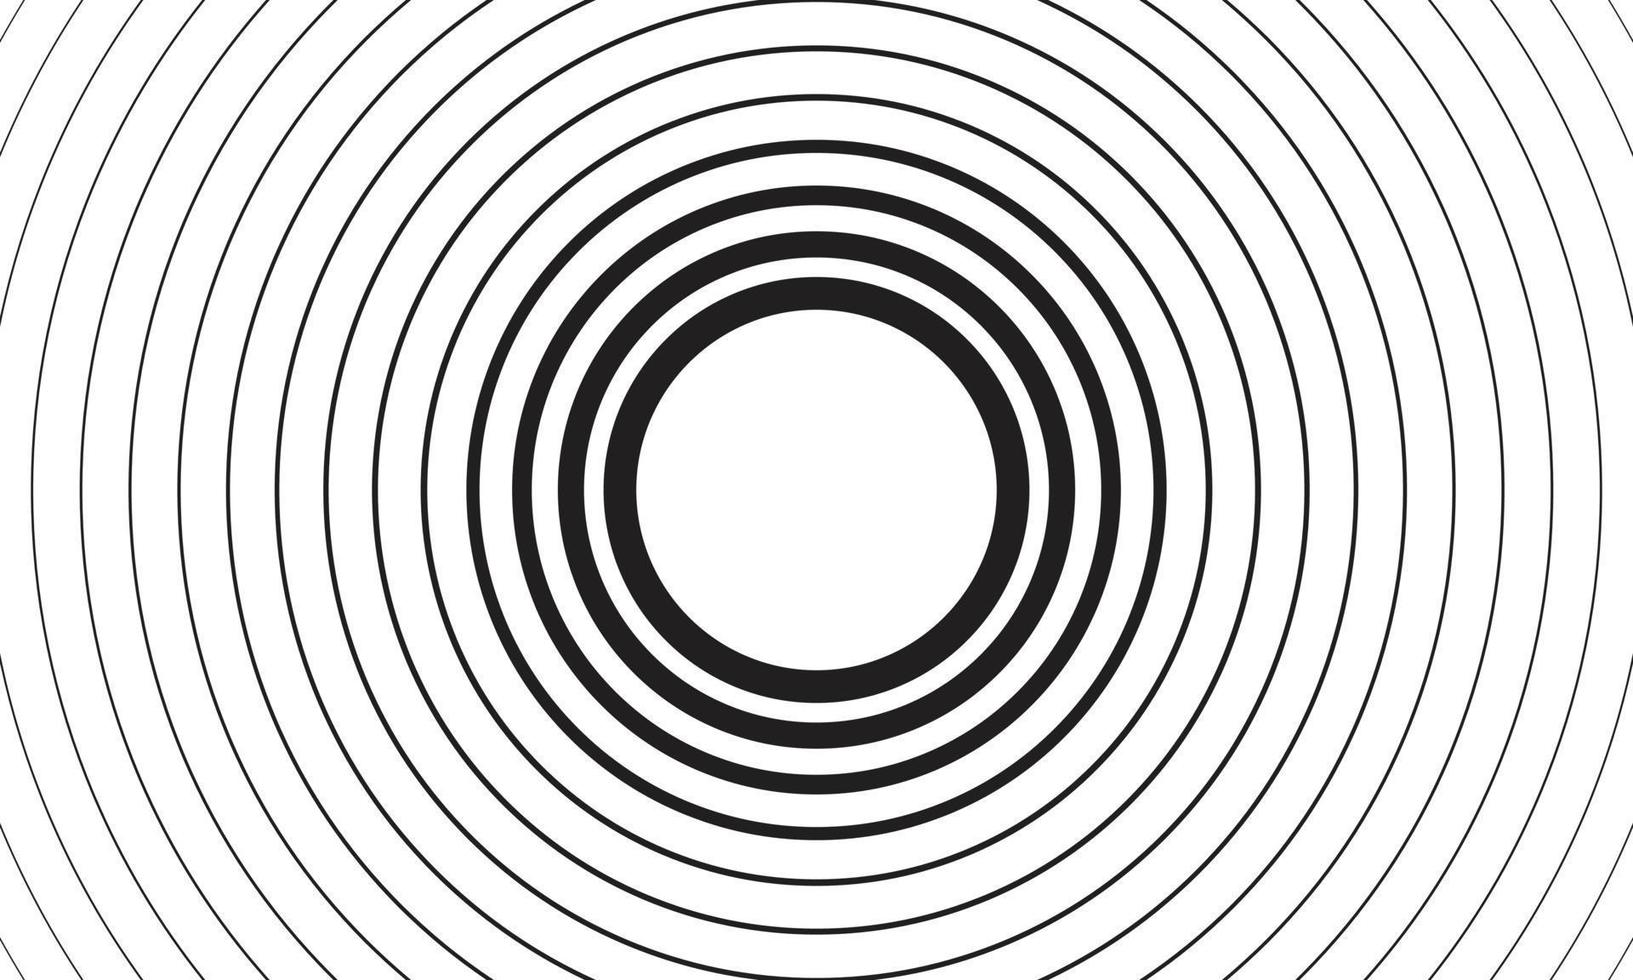 Geometric radial element. Abstract concentric, radial geometric motif Black and white concentric line circle background. Wash and storm concept or simple vector illustration of ripple effect